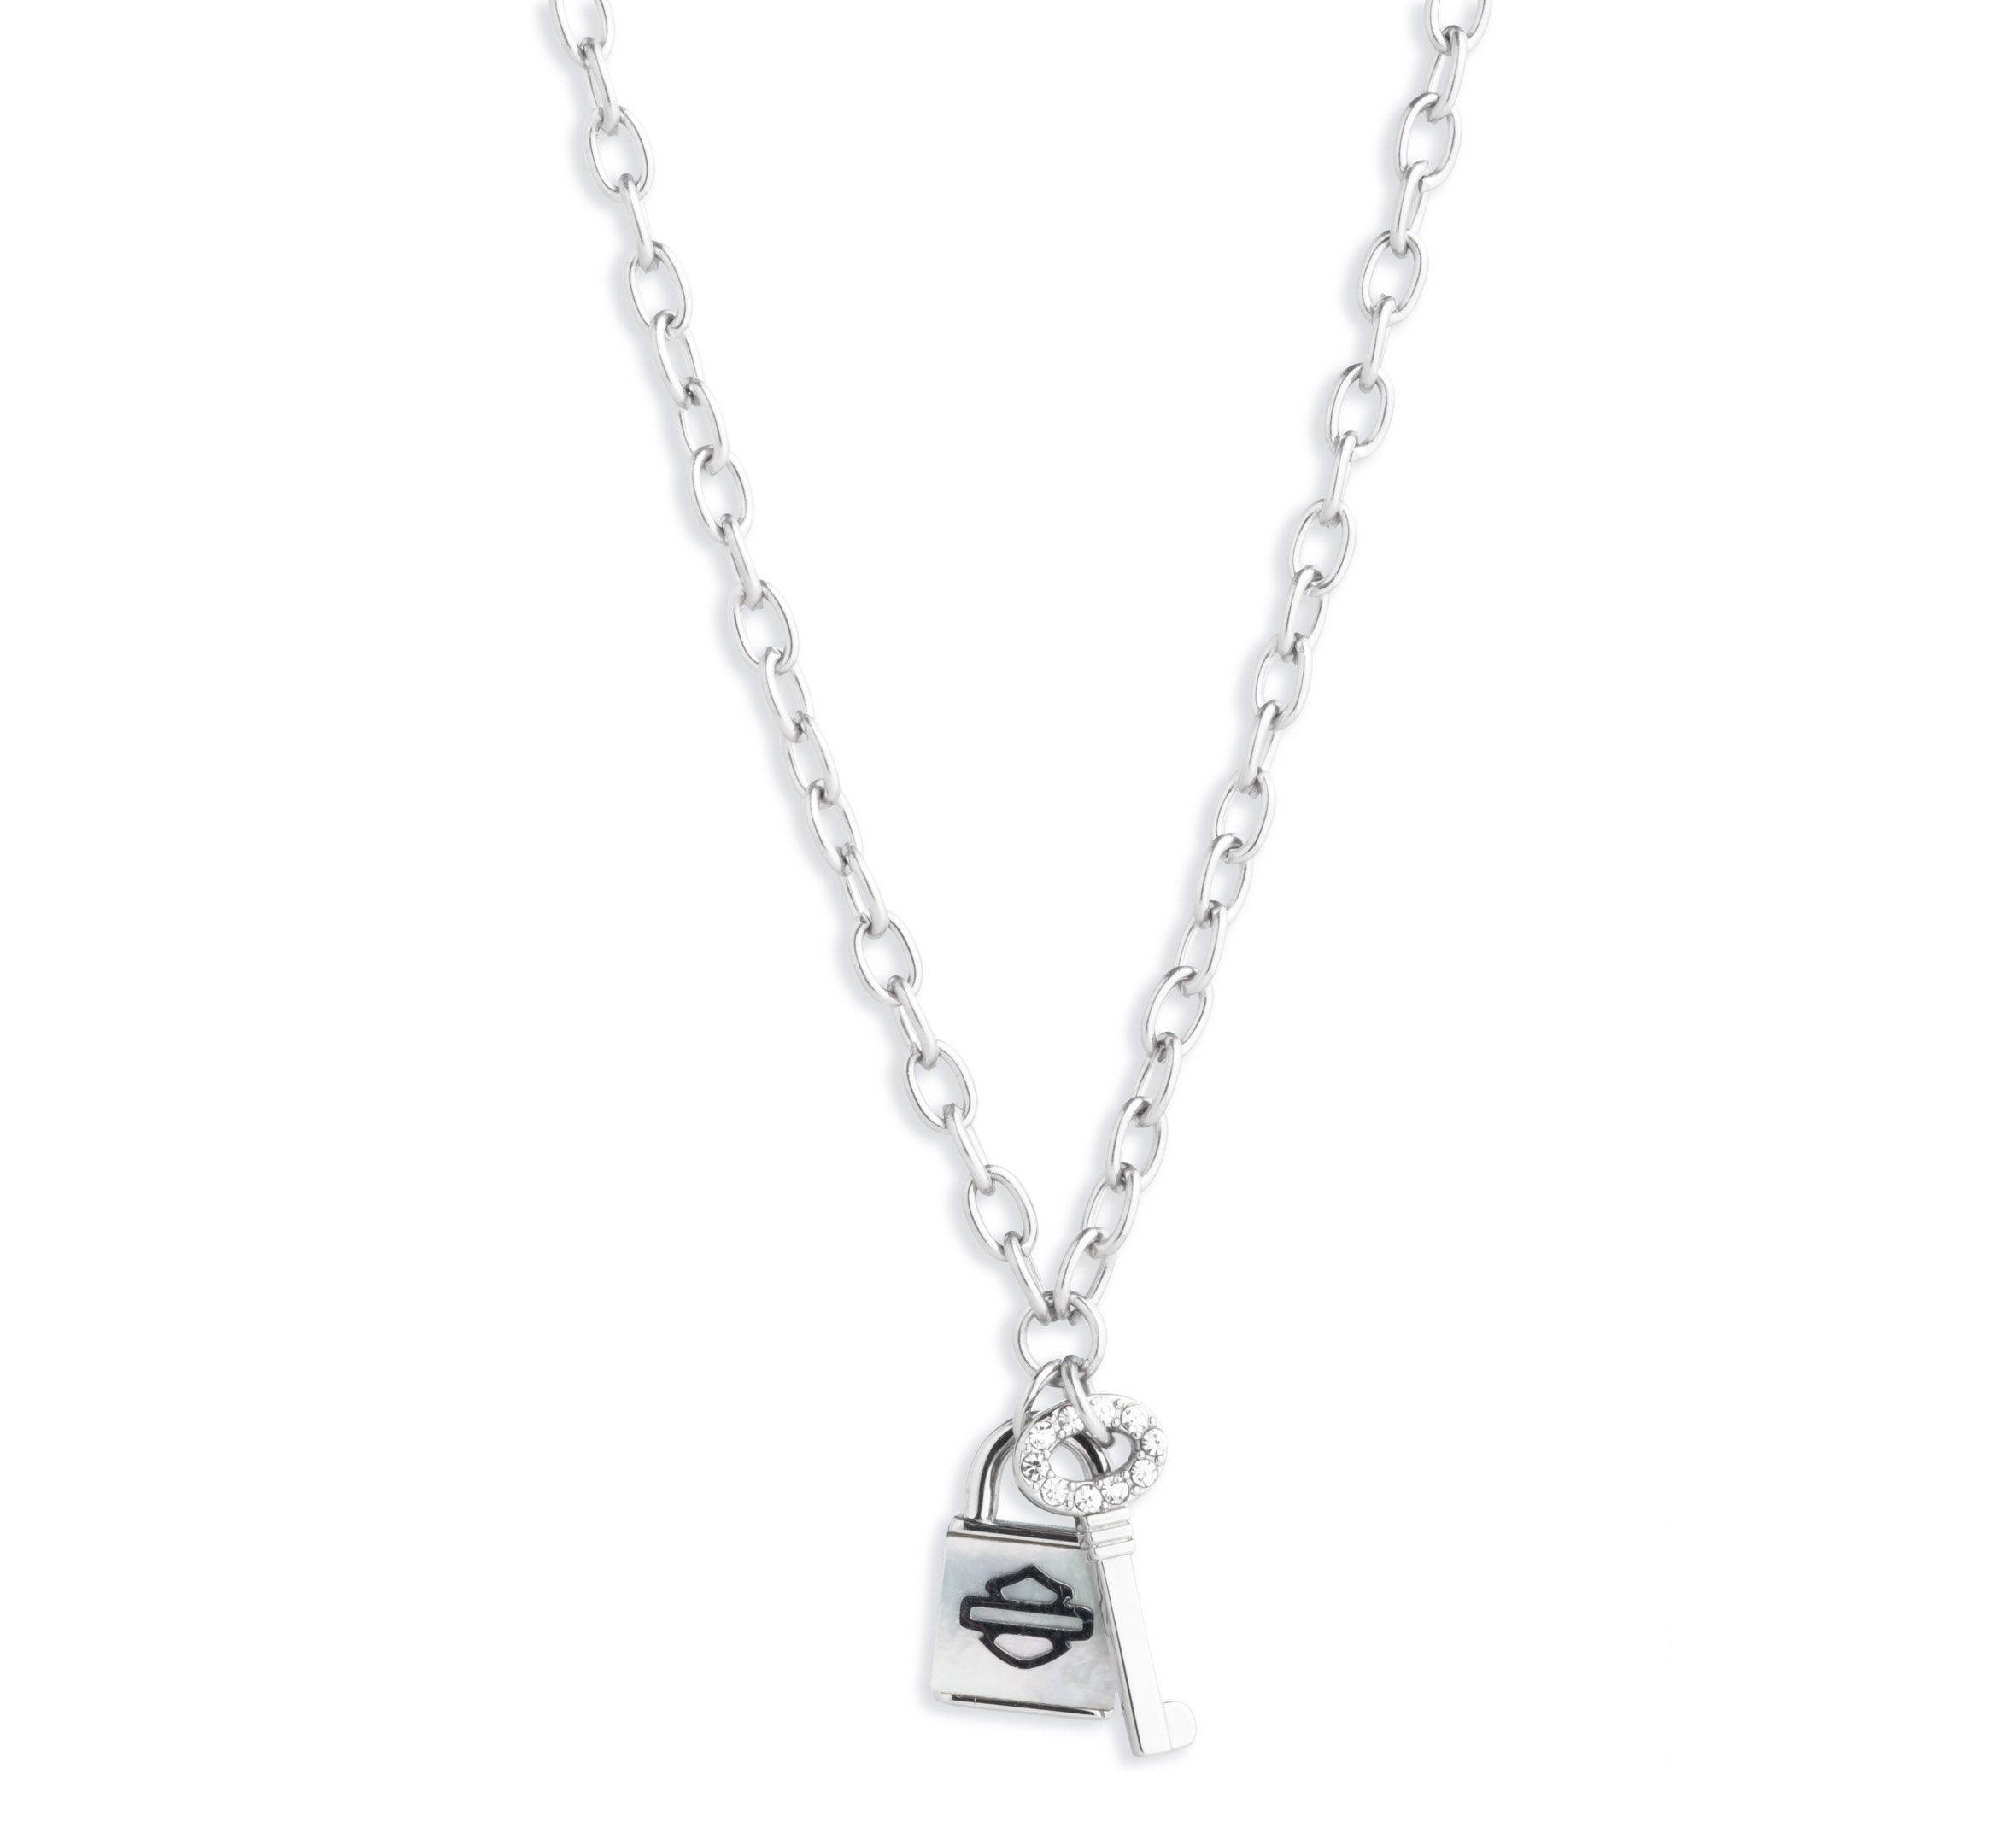 Women's Motorcycle Necklaces | Harley-Davidson USA